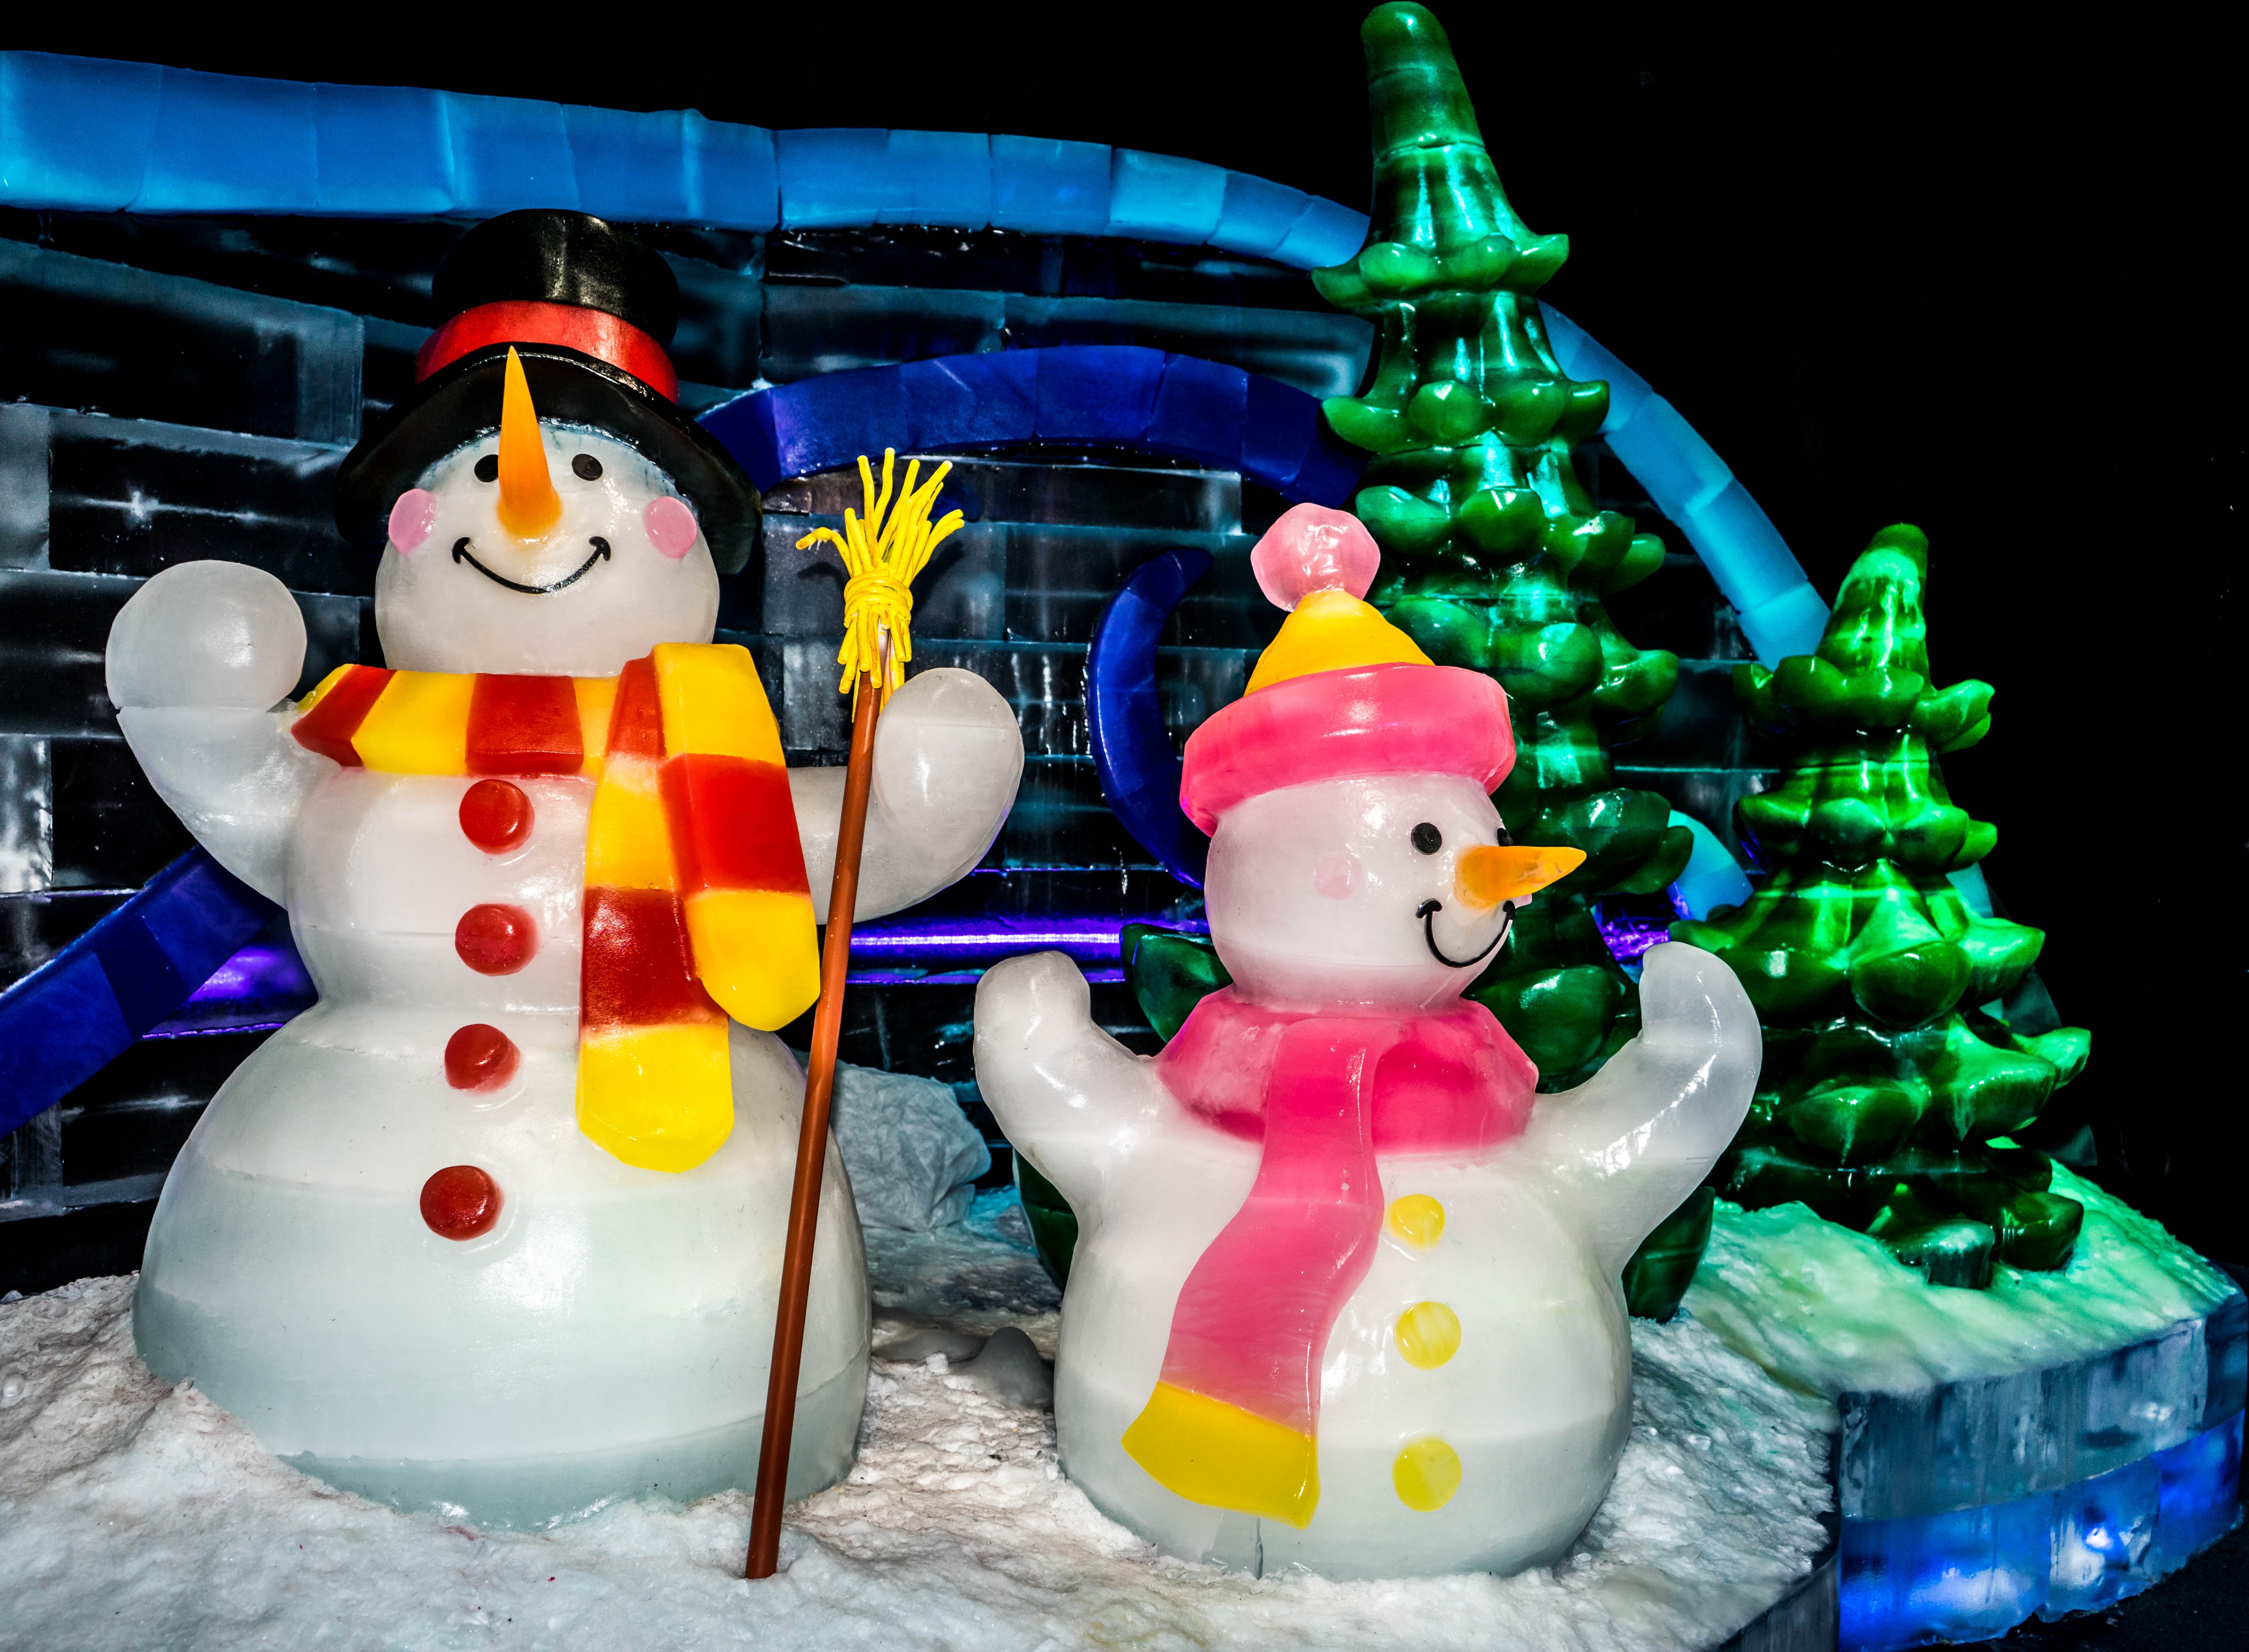 two snowman wearing scarves figurines